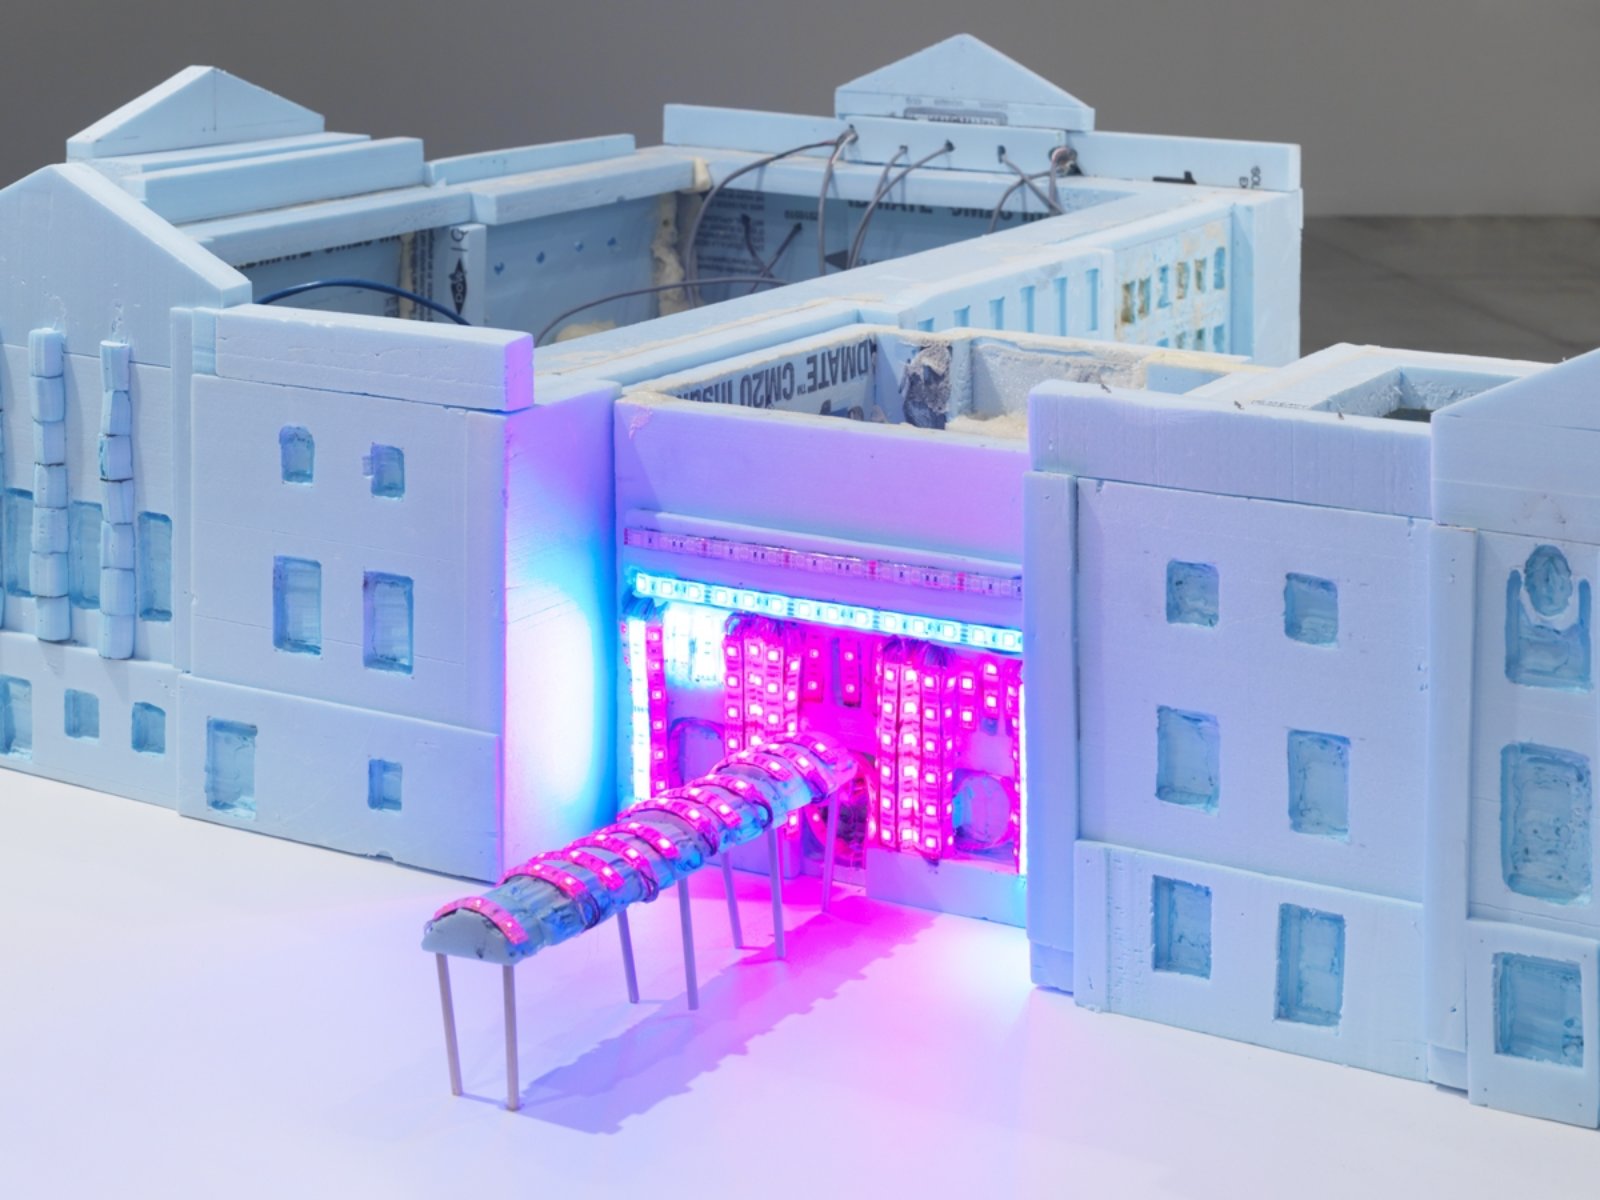 Kevin Schmidt, RGB Beg Cycle, 2018, styrofoam model of vancouver art gallery with led lights, dmx controllers, customized recording software, midi keyboards, electronics, computer, audio broadcast over radio, led lighting on exterior of gallery, dimensions variable. Installation view, We Are the Robots, Vancouver Art Gallery, Vancouver, 2018